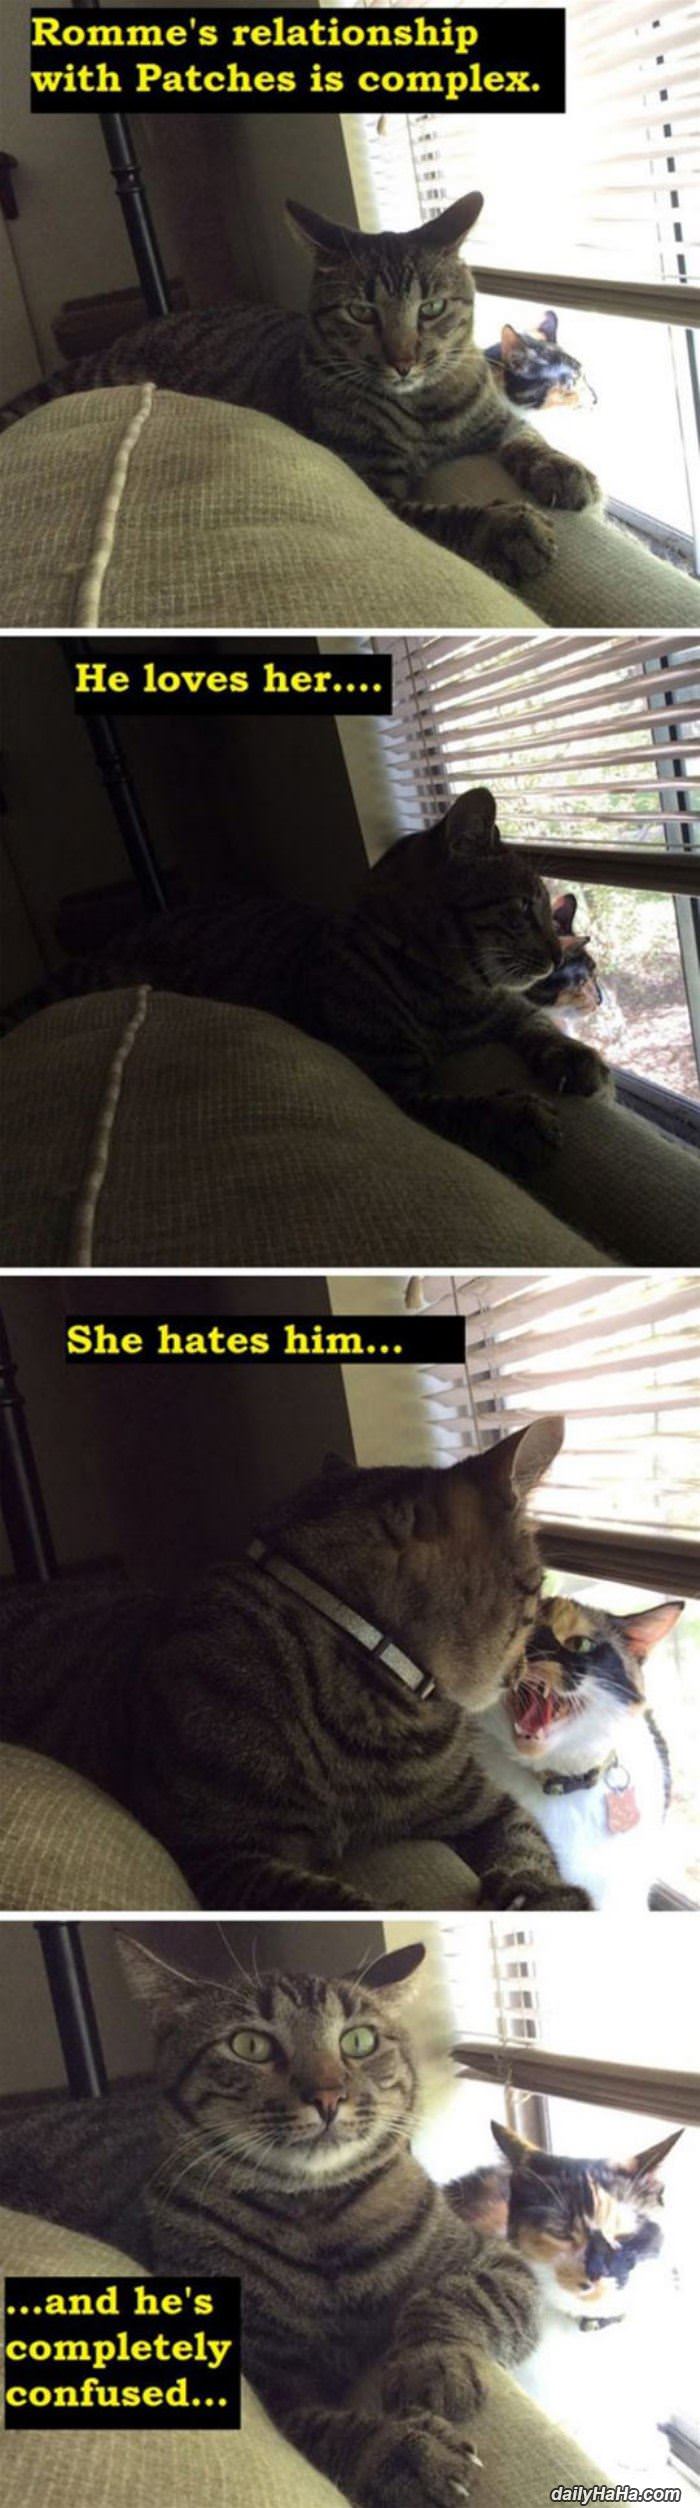 cat relationship funny picture